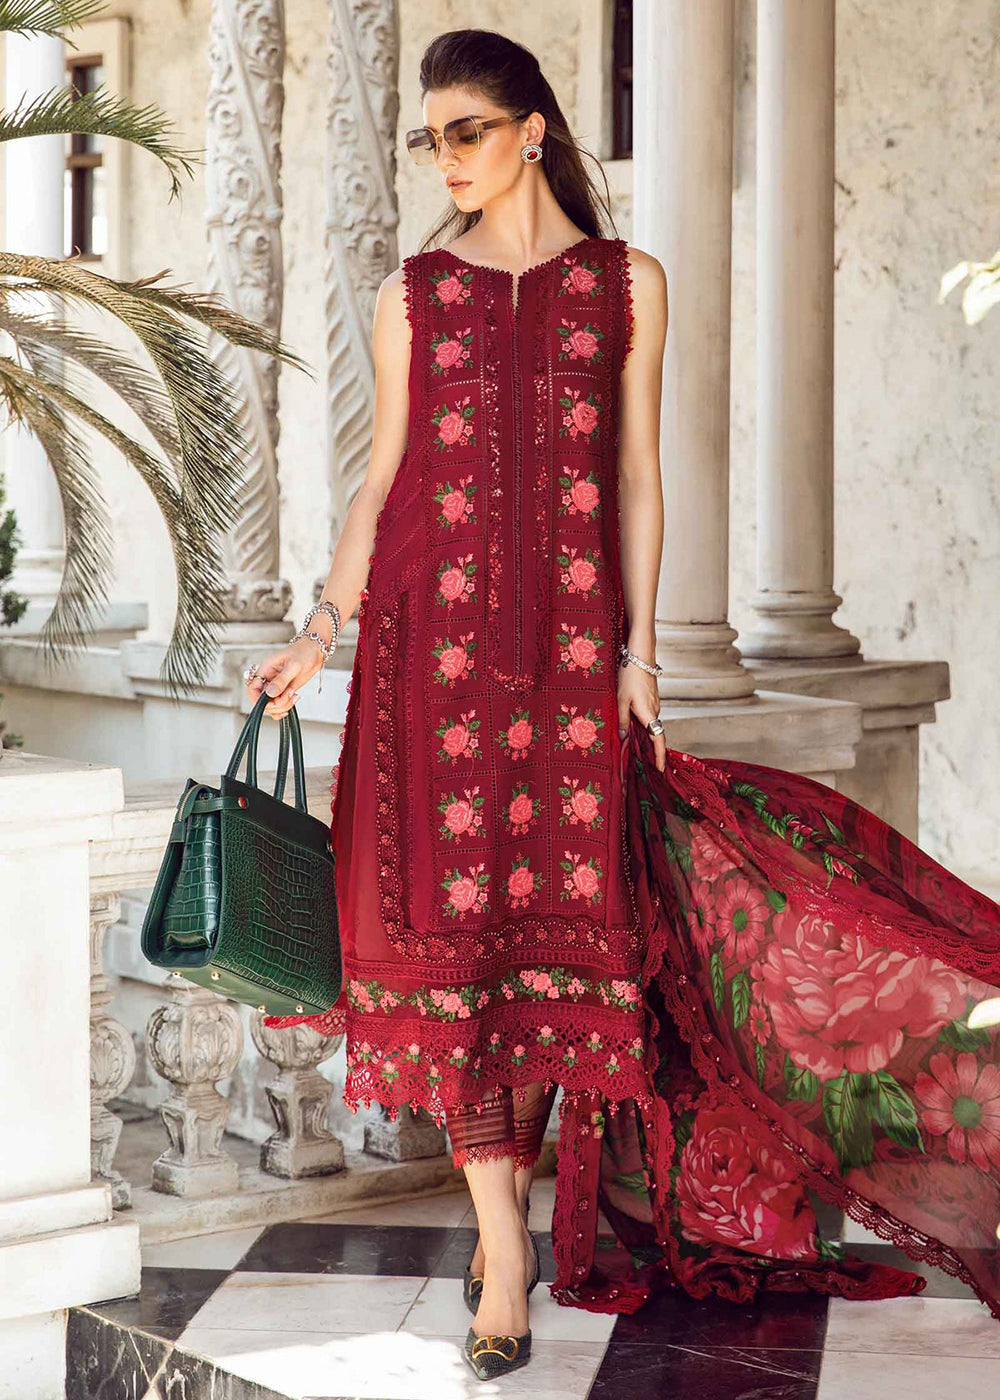 Buy Now Unstitched Luxury Lawn Eid 2 Edition '24 by Maria B | EL-24-05 Online at Empress in USA, UK, Canada, Germany, Italy, Dubai & Worldwide at Empress Clothing.